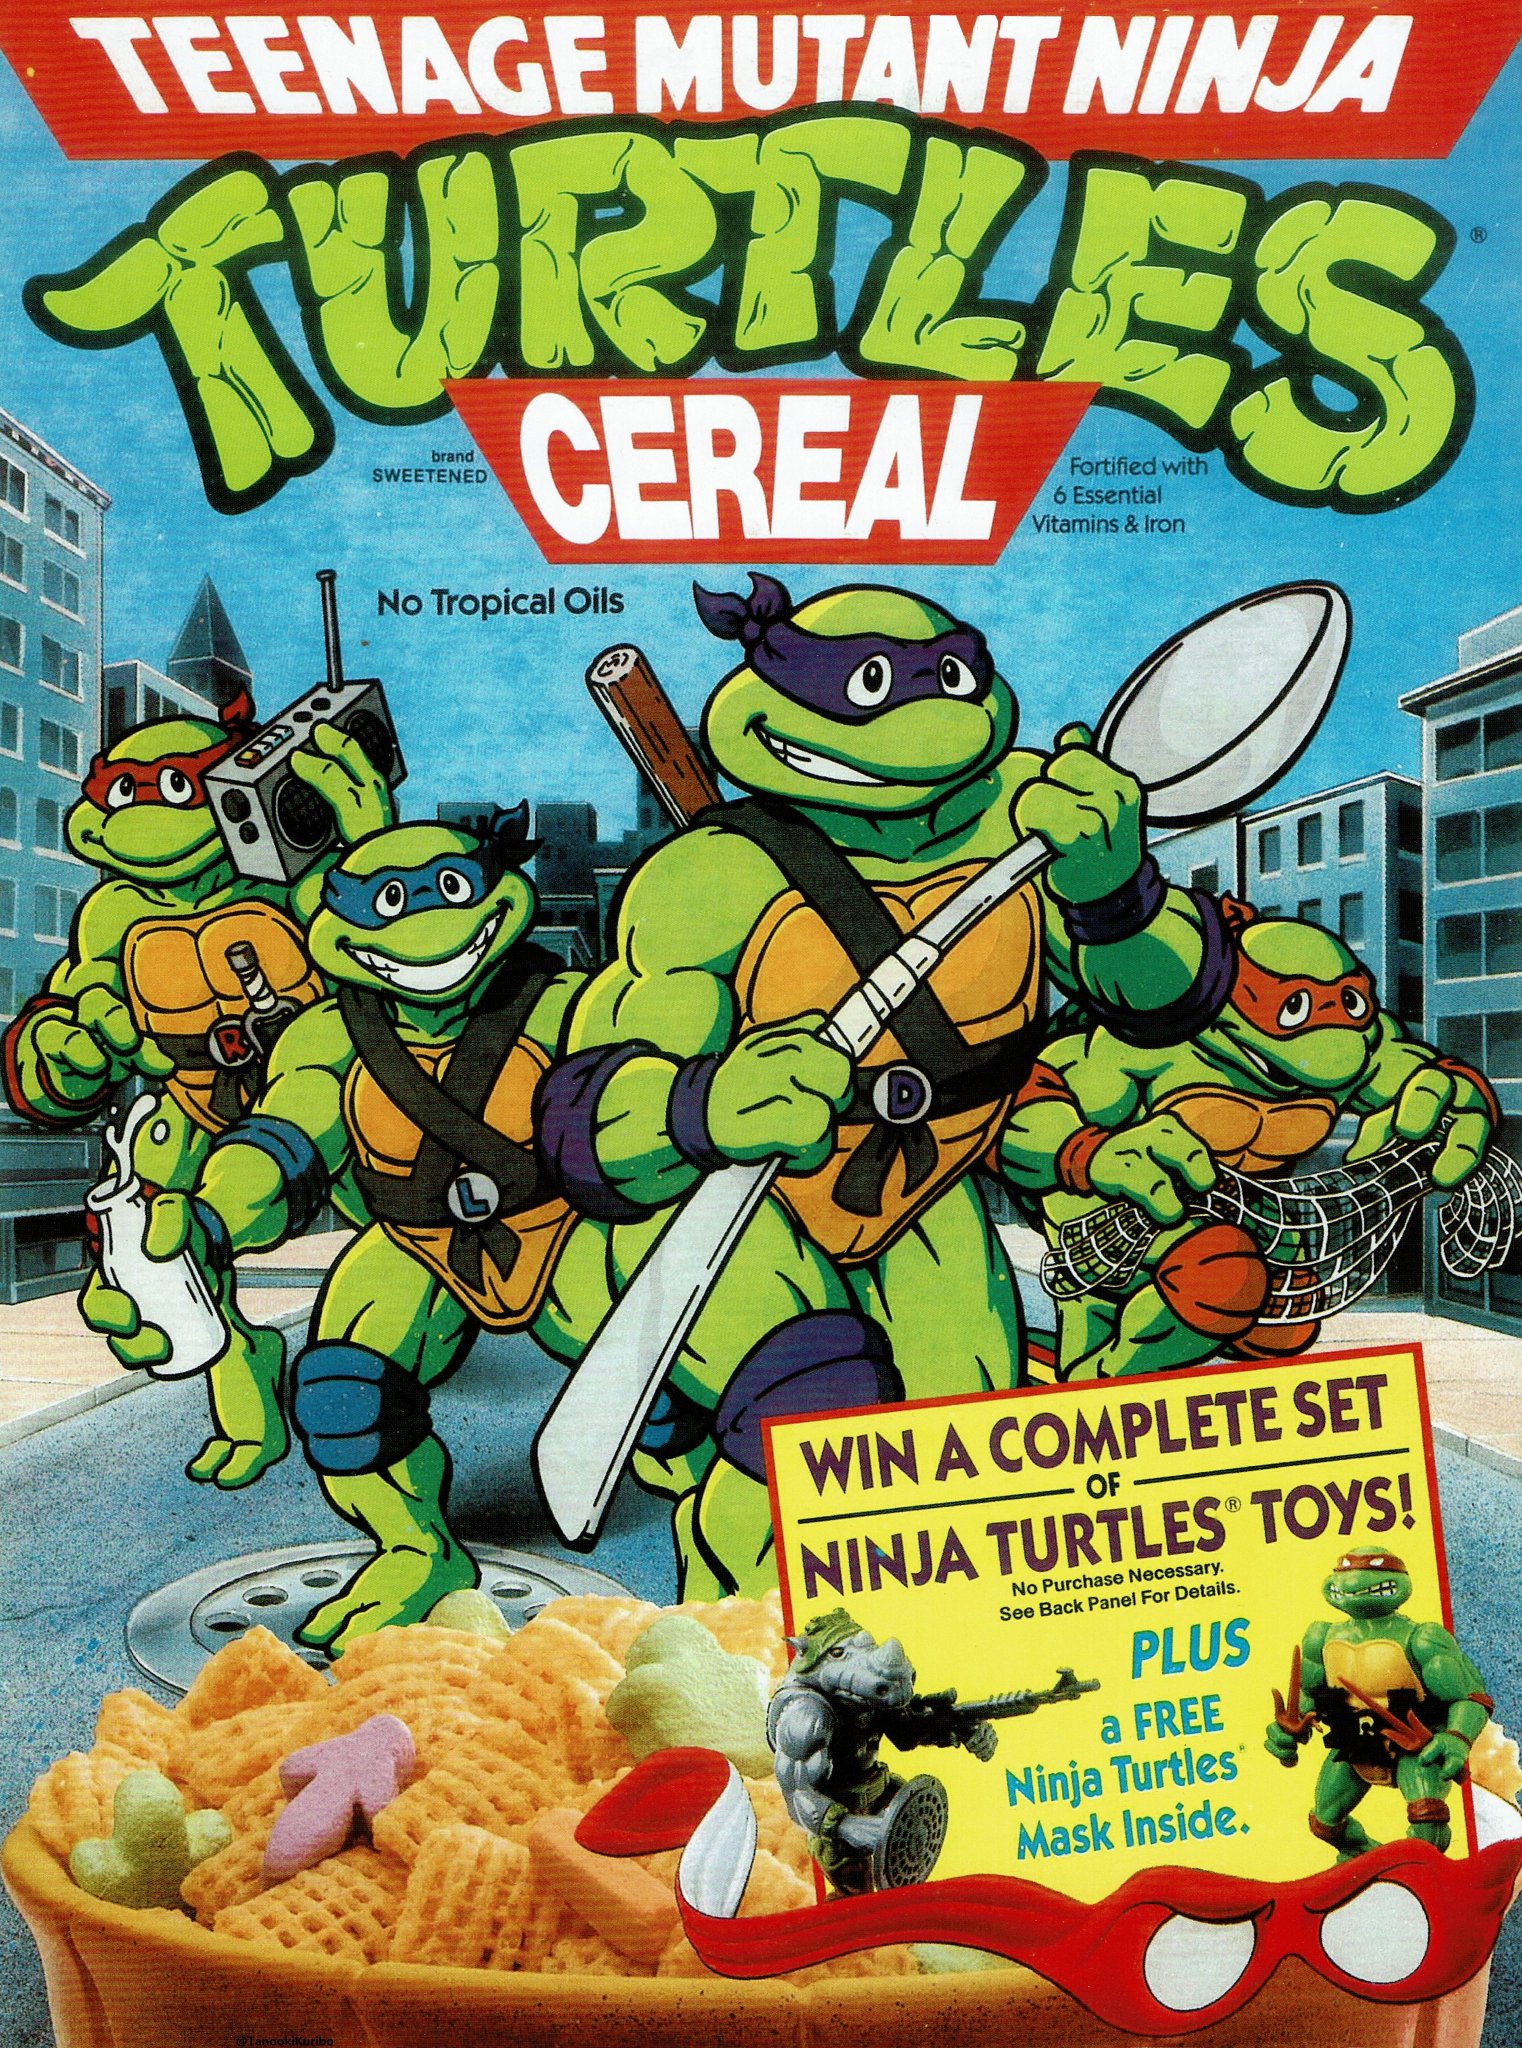 https://static.wikia.nocookie.net/tmnt/images/9/9d/Tmnt_cereal.jpg/revision/latest?cb=20190109032022